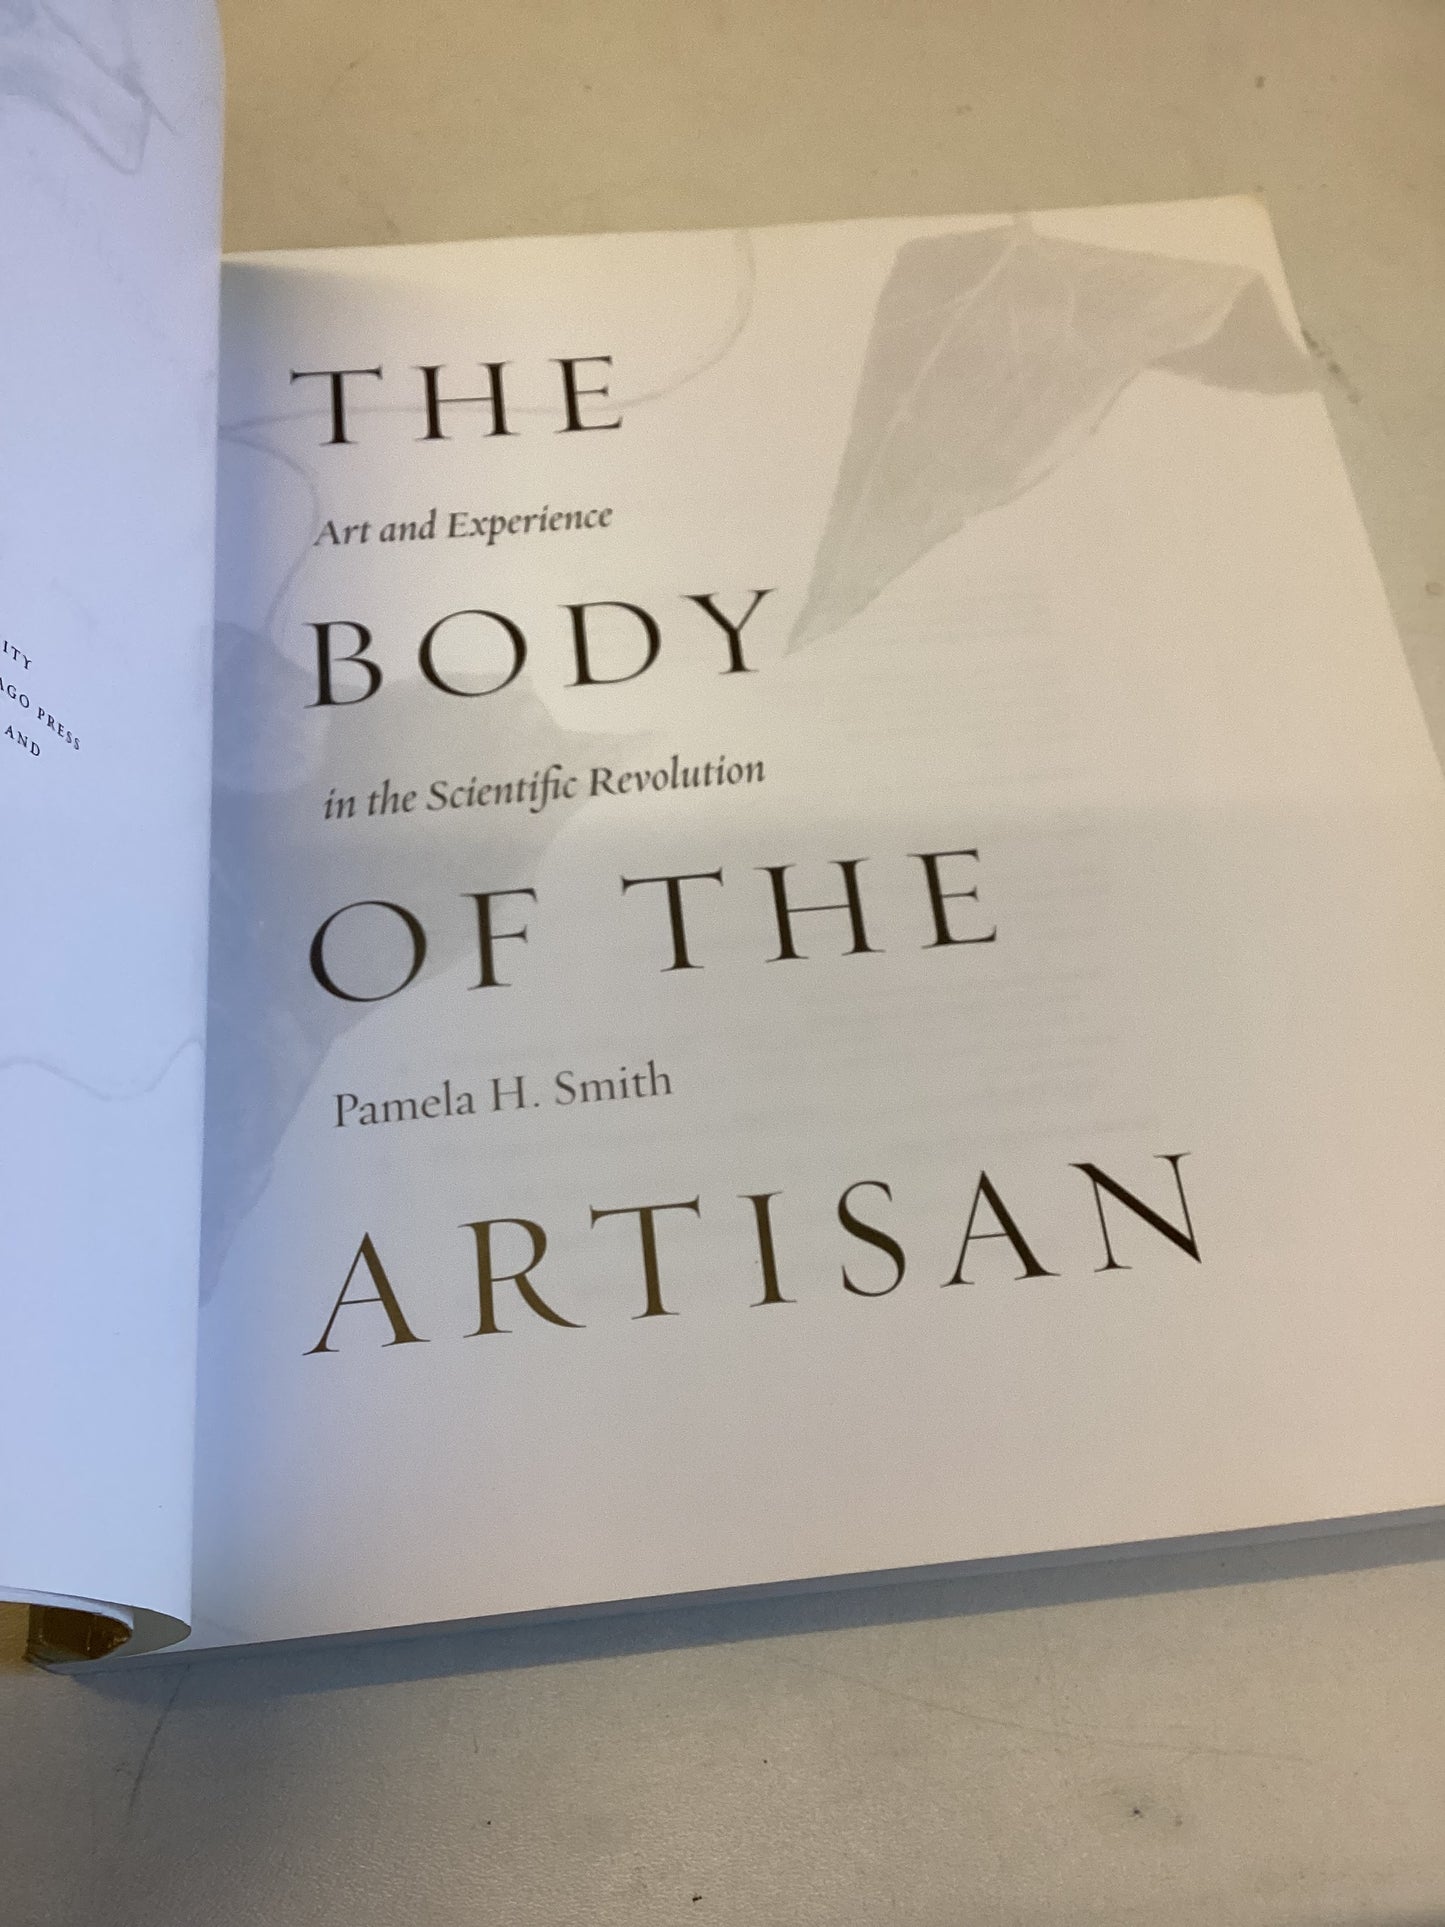 The Body of The Artisan Art Experience in The Scientific Revolution Pamela H Smith